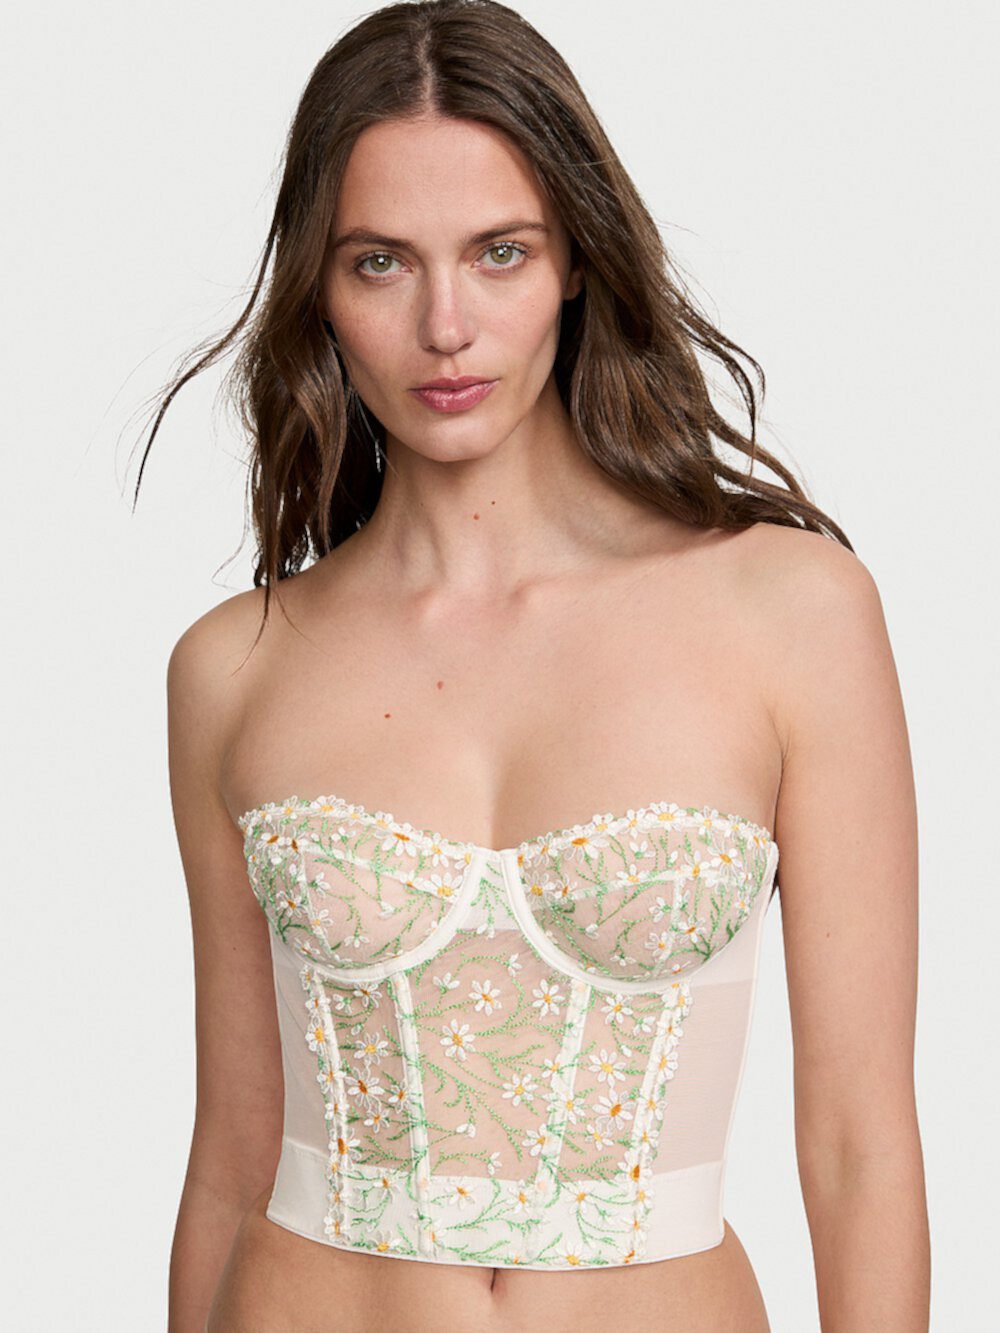 Daisy Chain Embroidery Strapless Corset Top Dream Angels